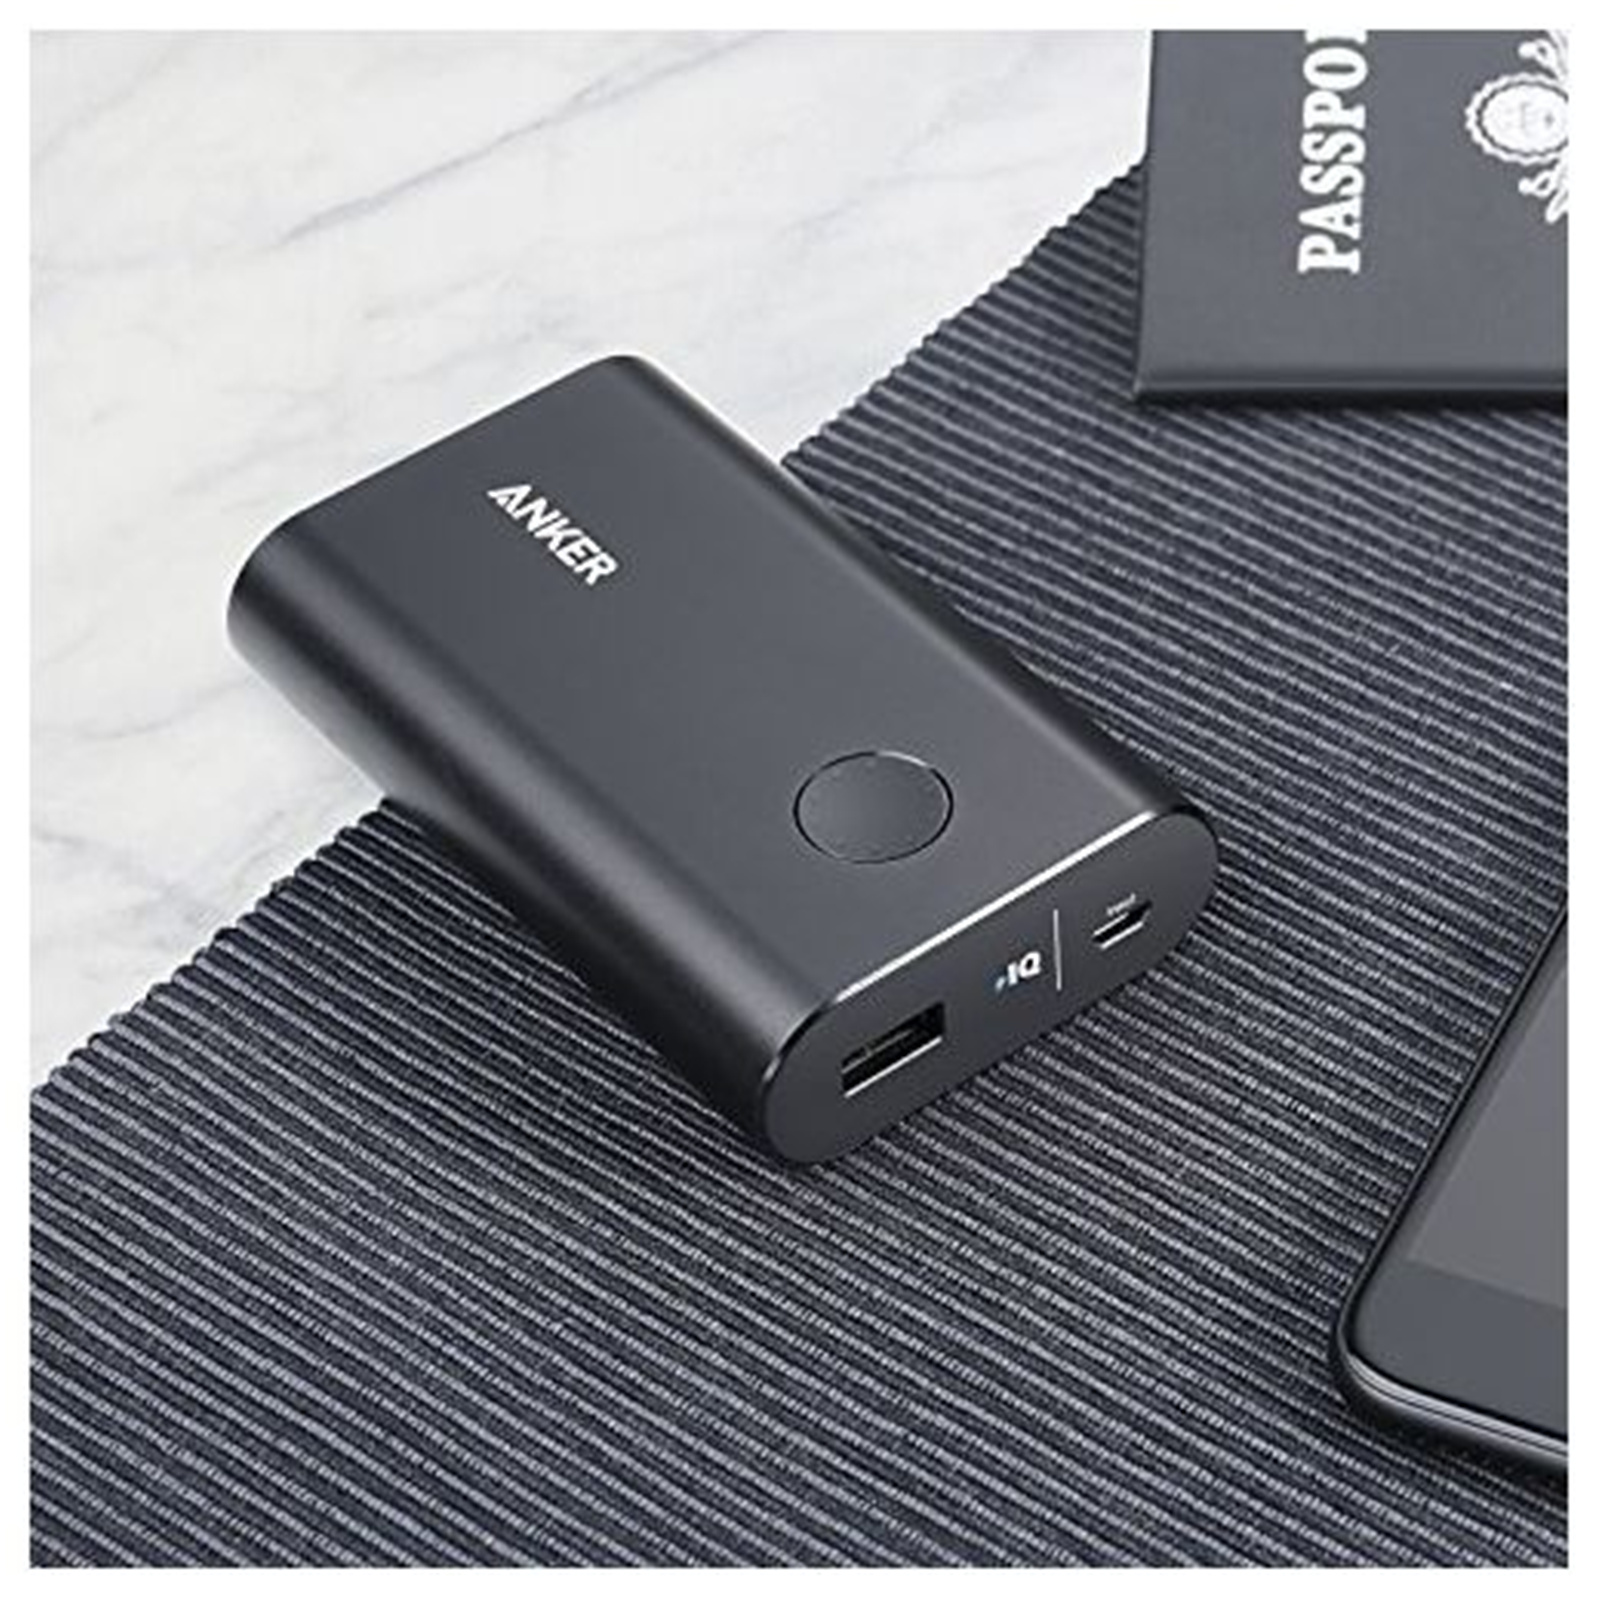 Buy ANKER PowerCore+ 10050 mAh Power Bank with Quick Charge 3.0 - Black ( A1311H11 ) online - PBTech.com/pacific